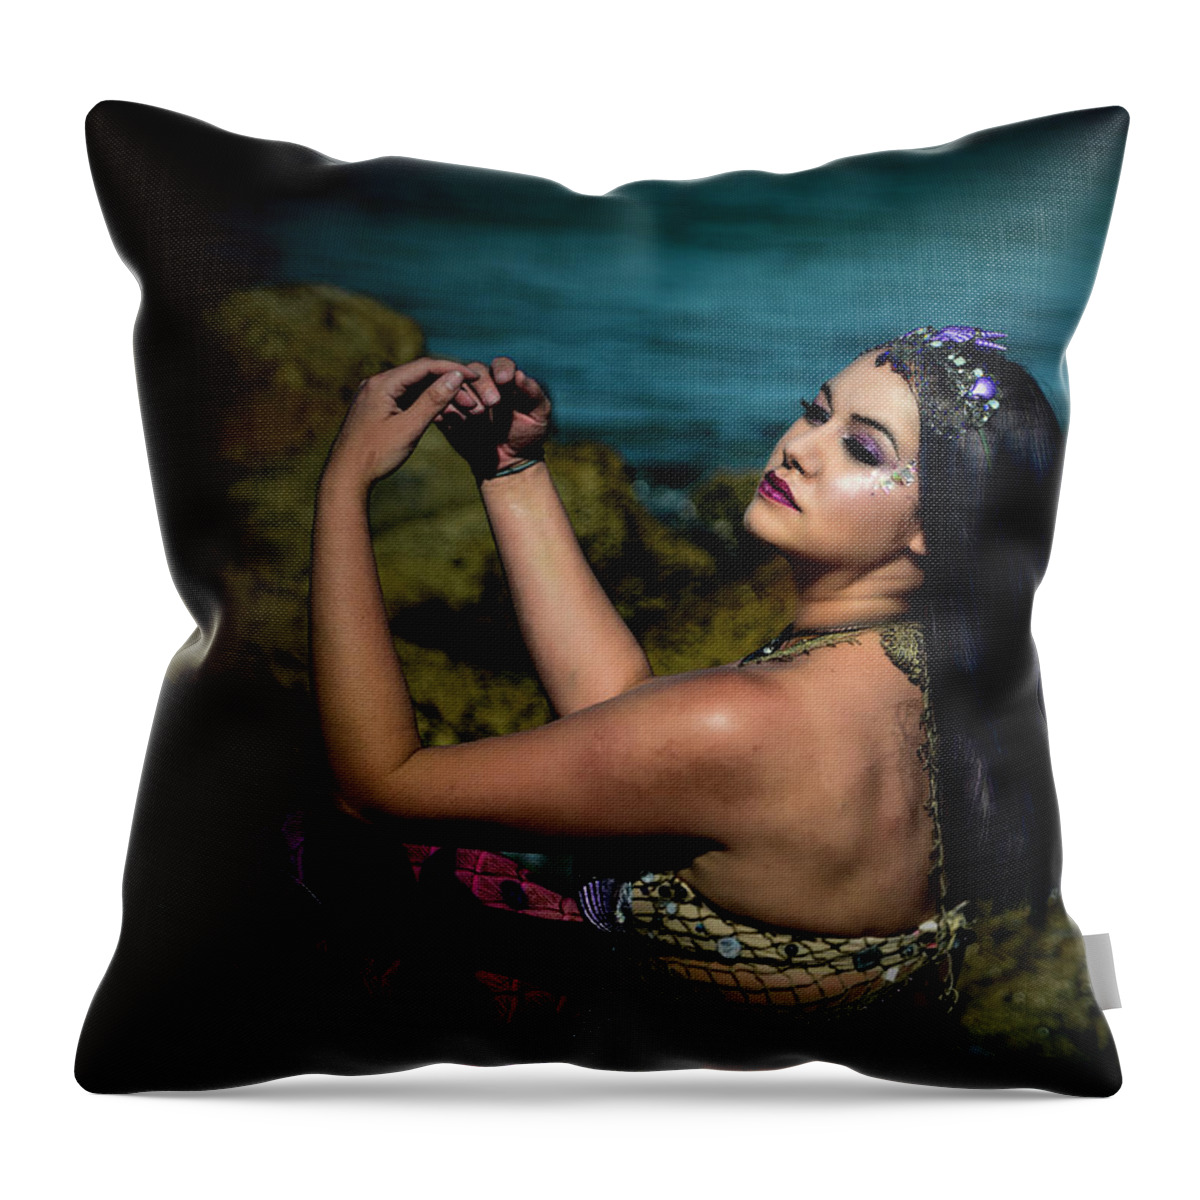 Mermaid Throw Pillow featuring the photograph Mermaid Posing 2 by Keith Lovejoy